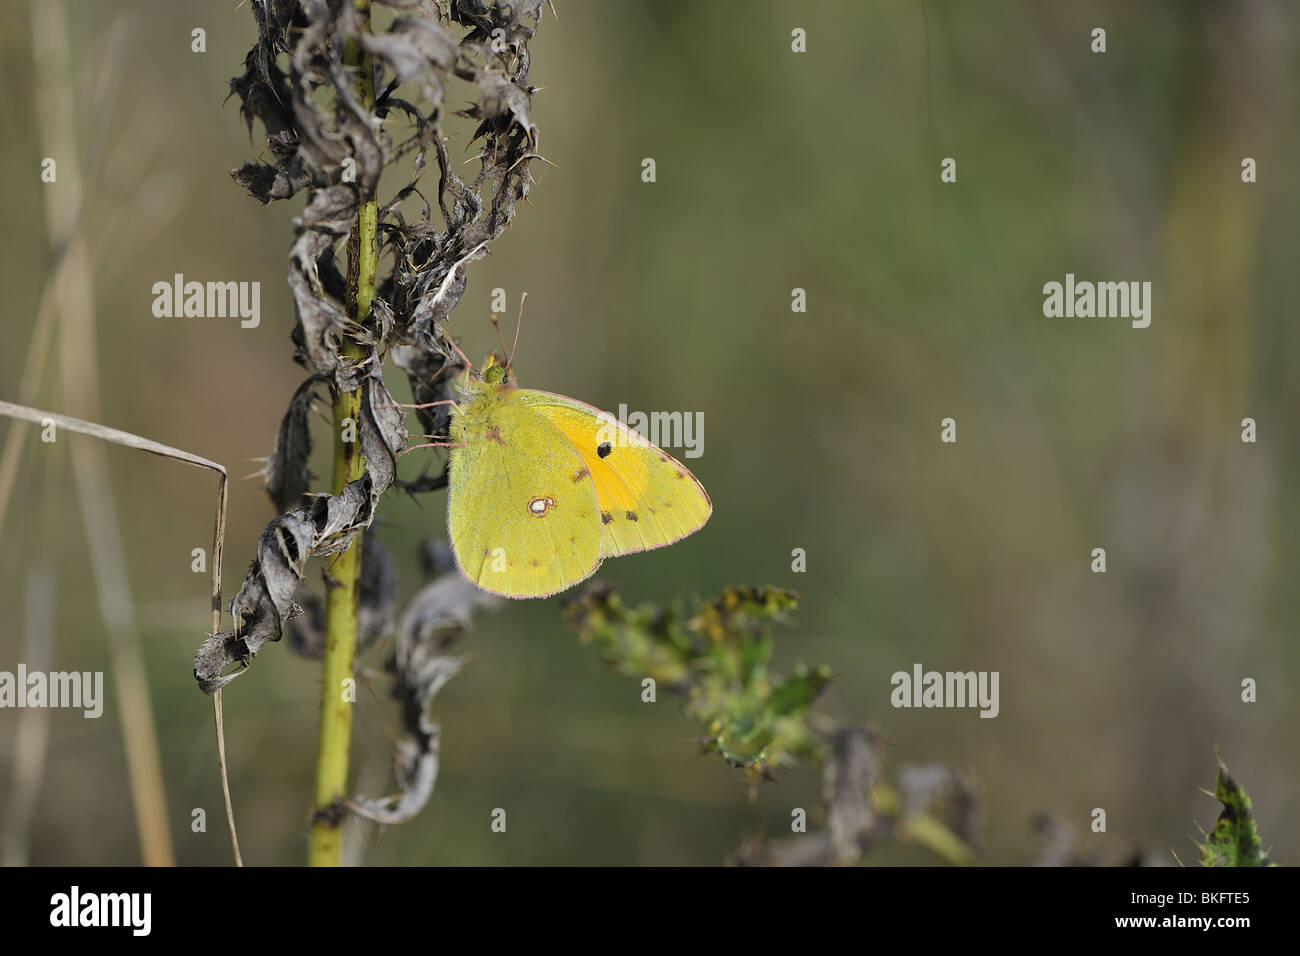 Clouded yellow butterfly wings closed on dry thistle in autumn Stock Photo